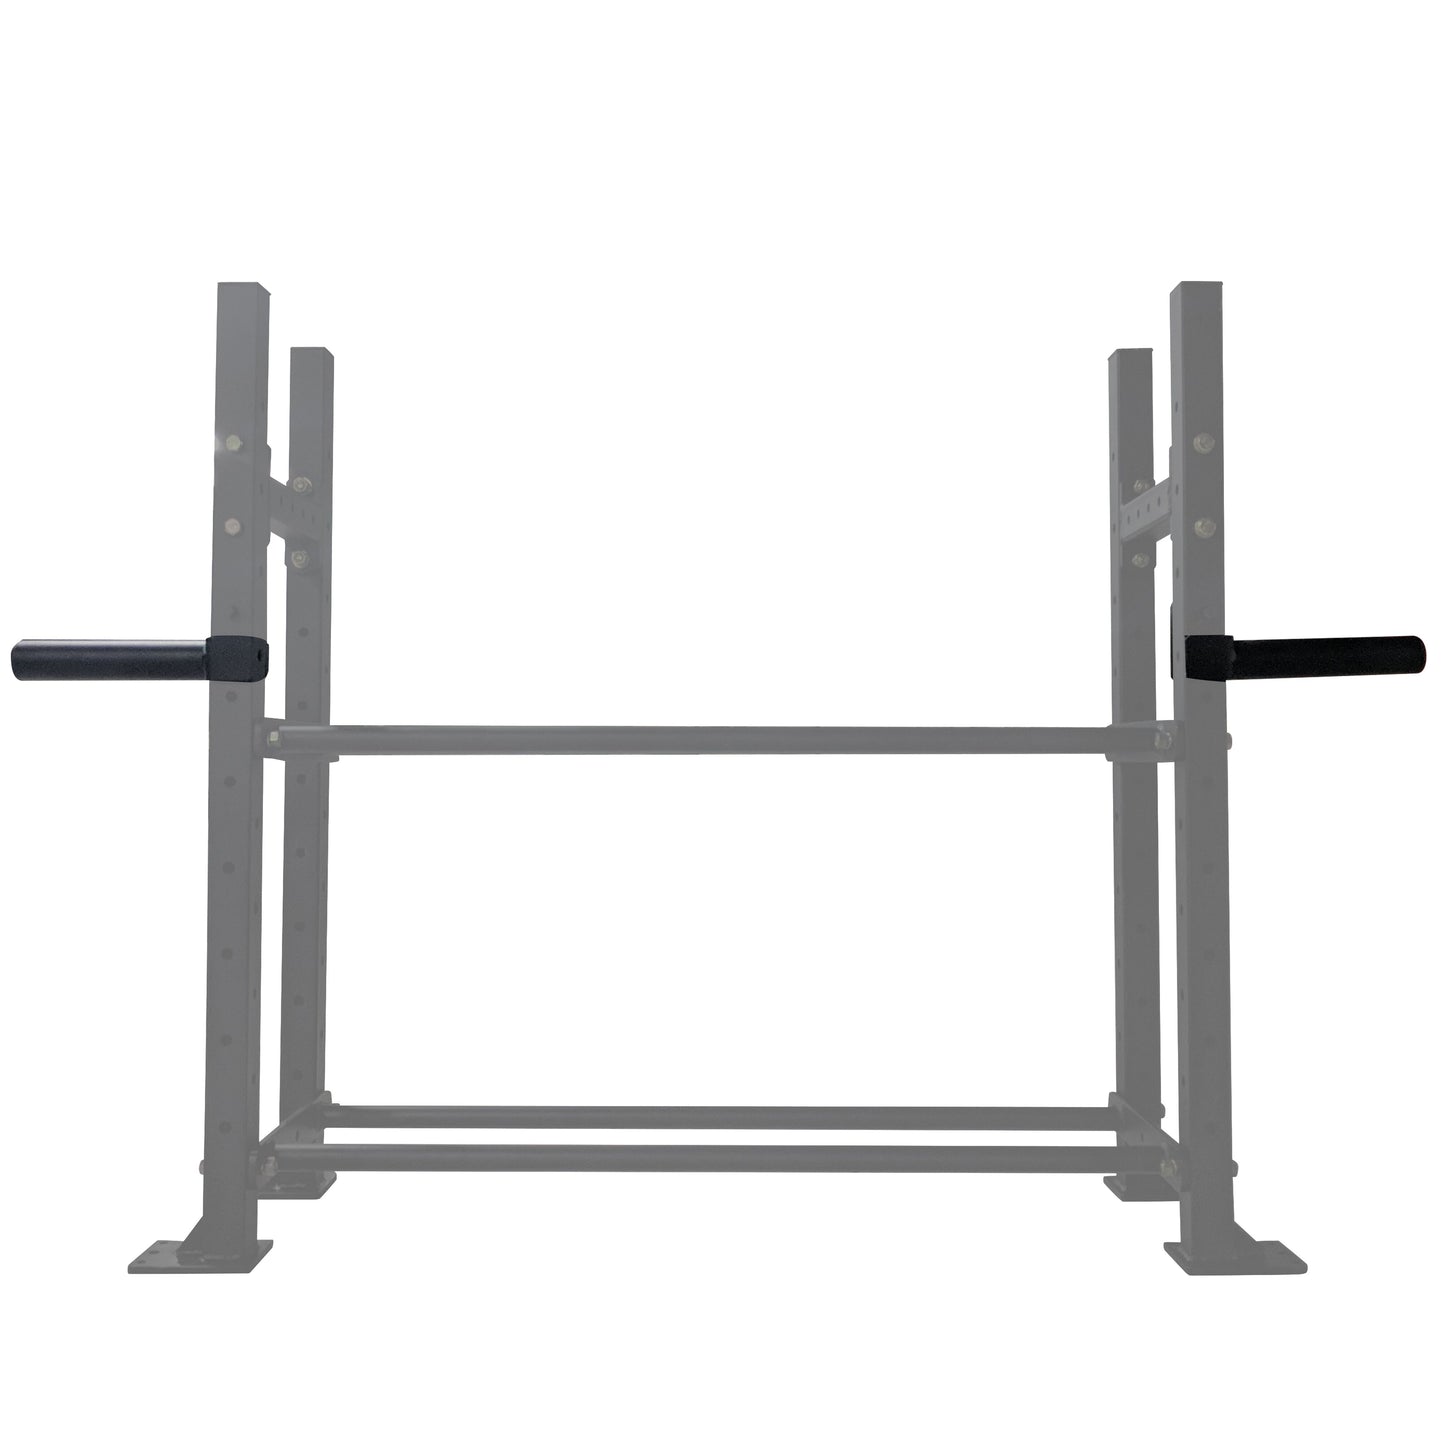 Weight Plate Holders for Mass Storage System - view 3